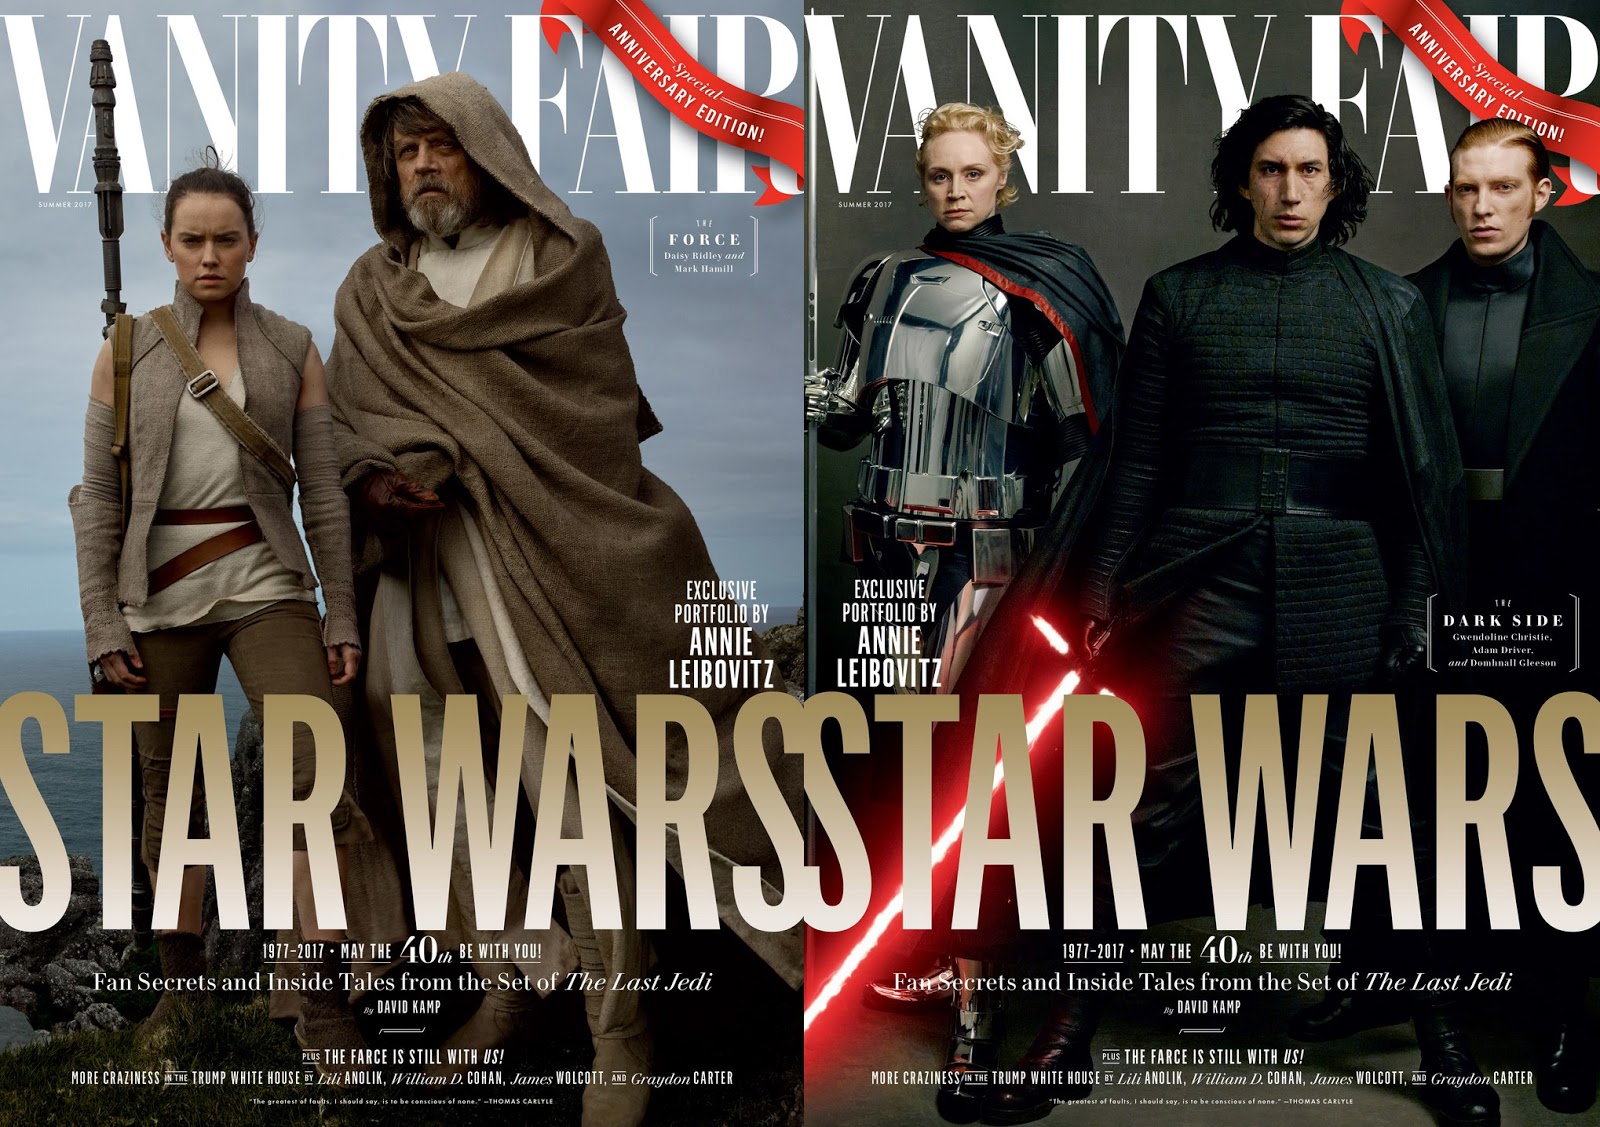 Covers for Vanity Fair's 'The Last Jedi' Special Issue ...